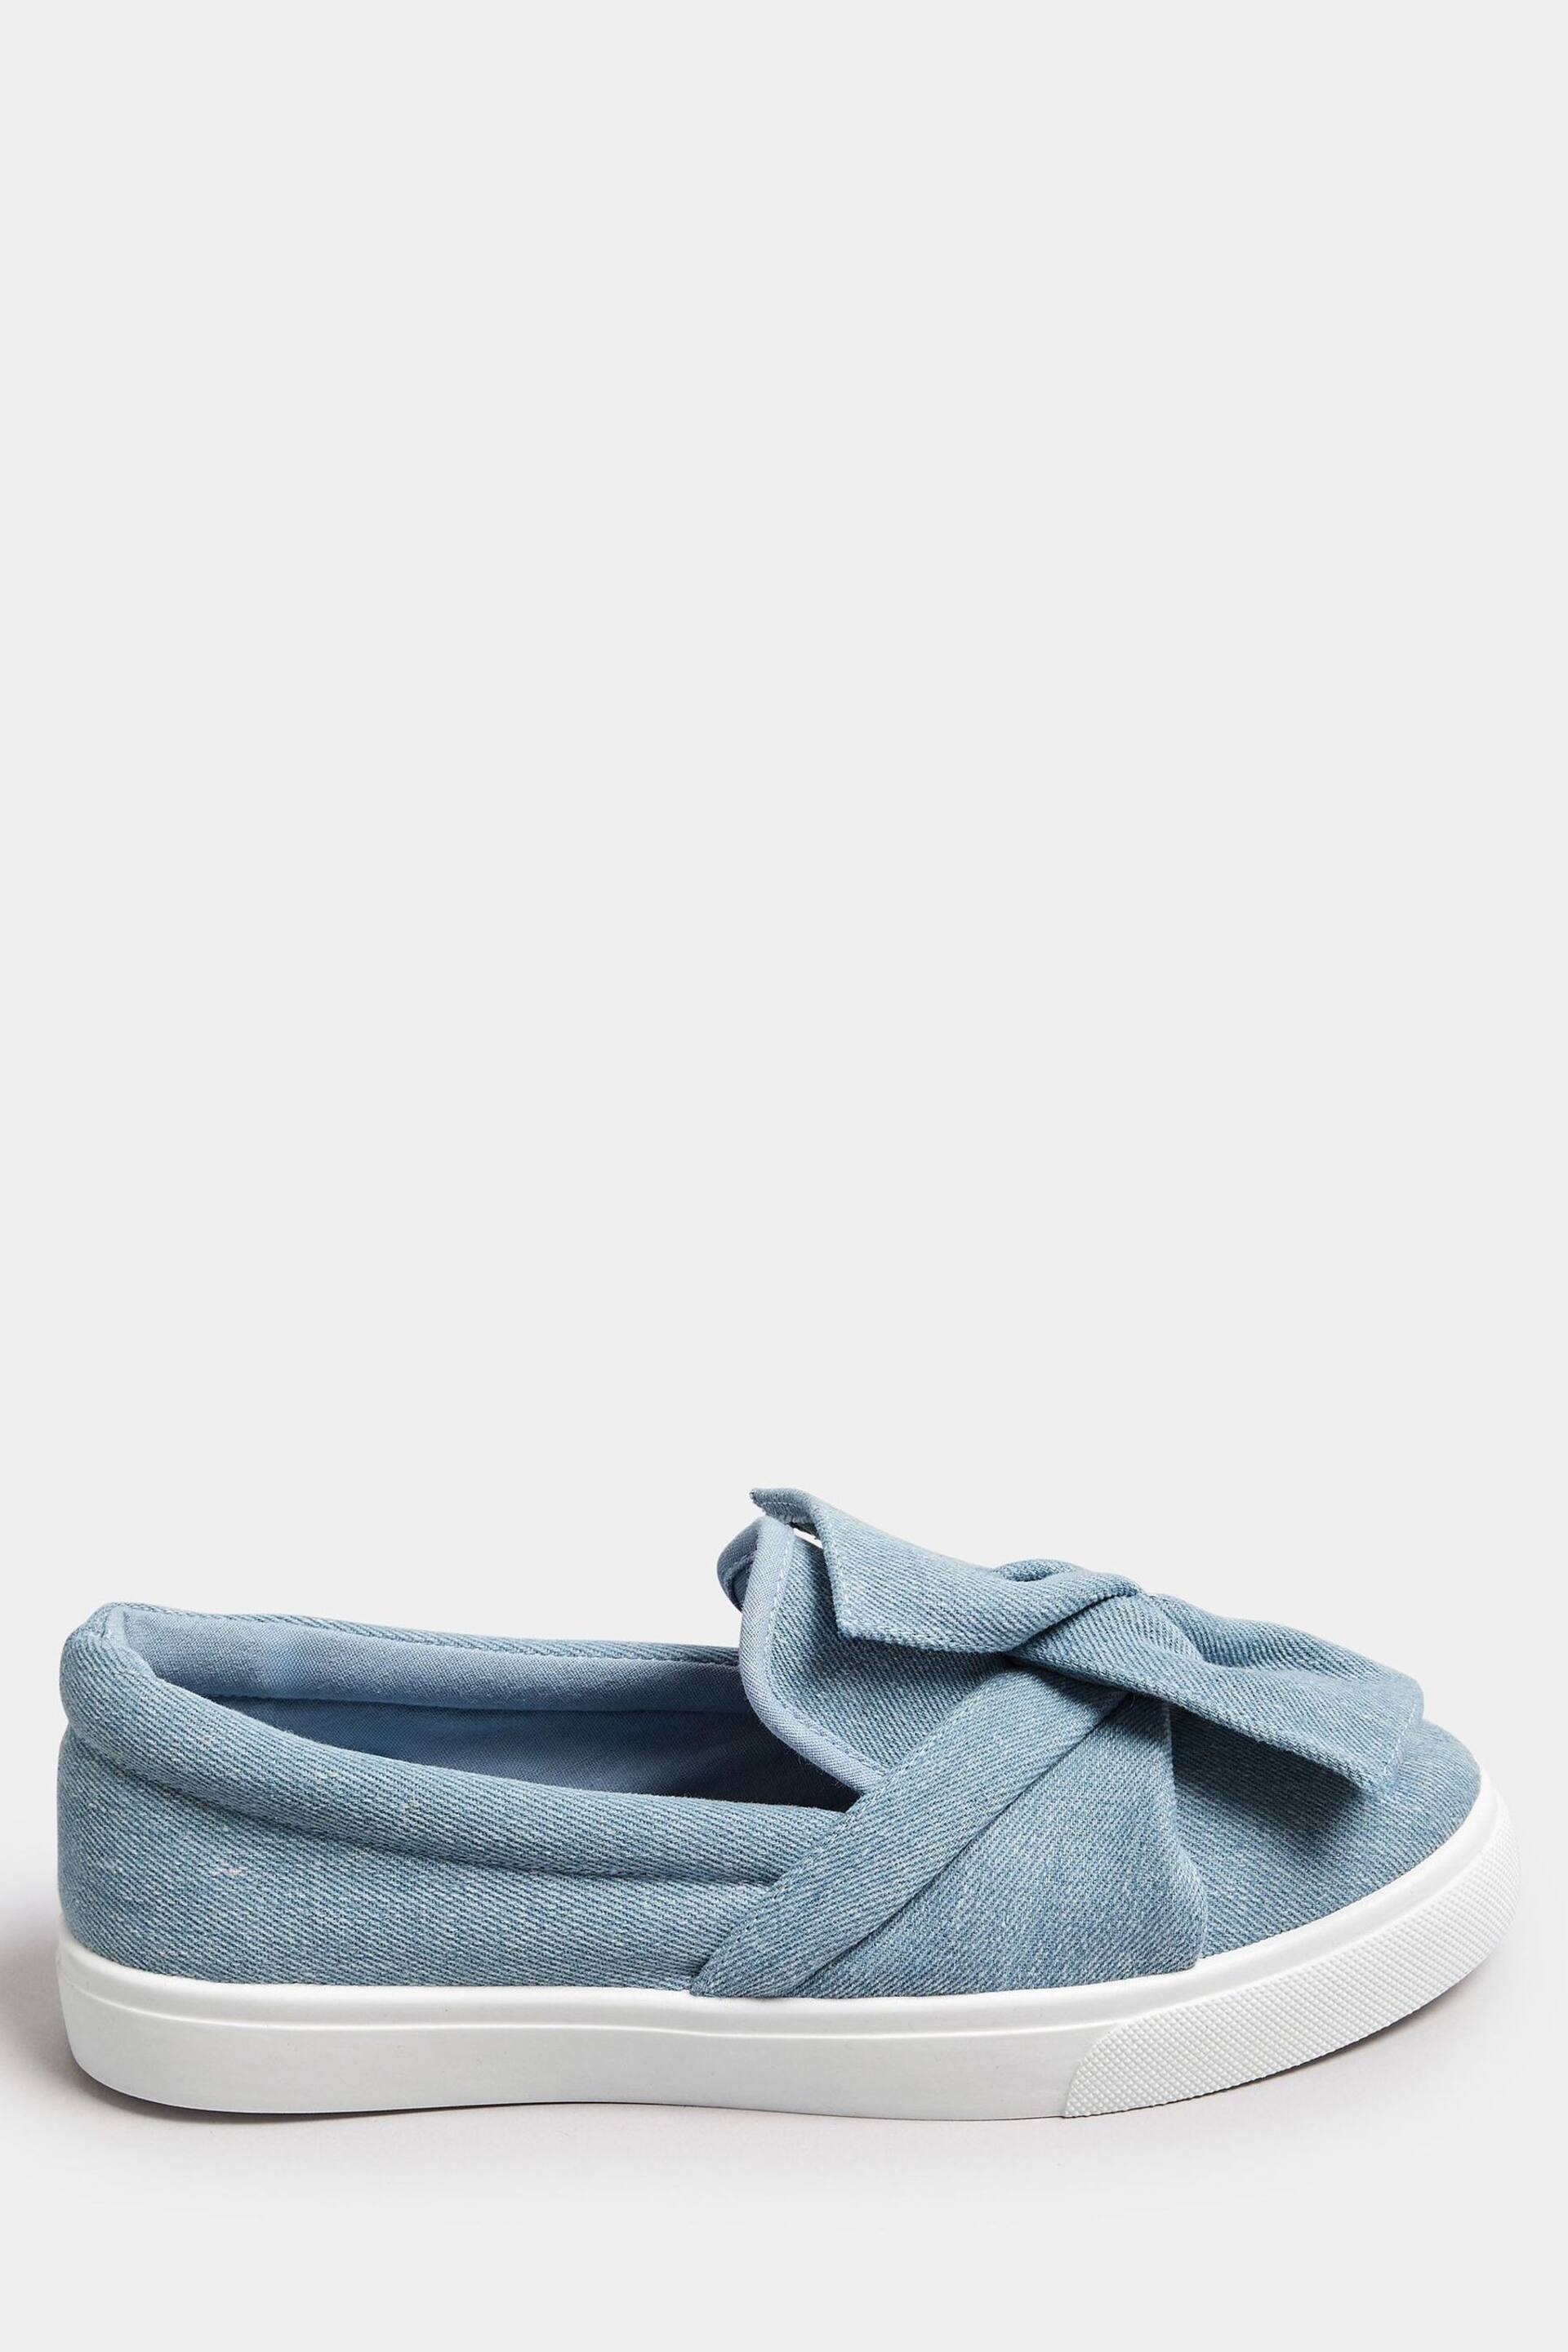 Yours Curve Blue Denim Twisted Bow Slip-On Trainers In Wide E Fit - Image 1 of 4